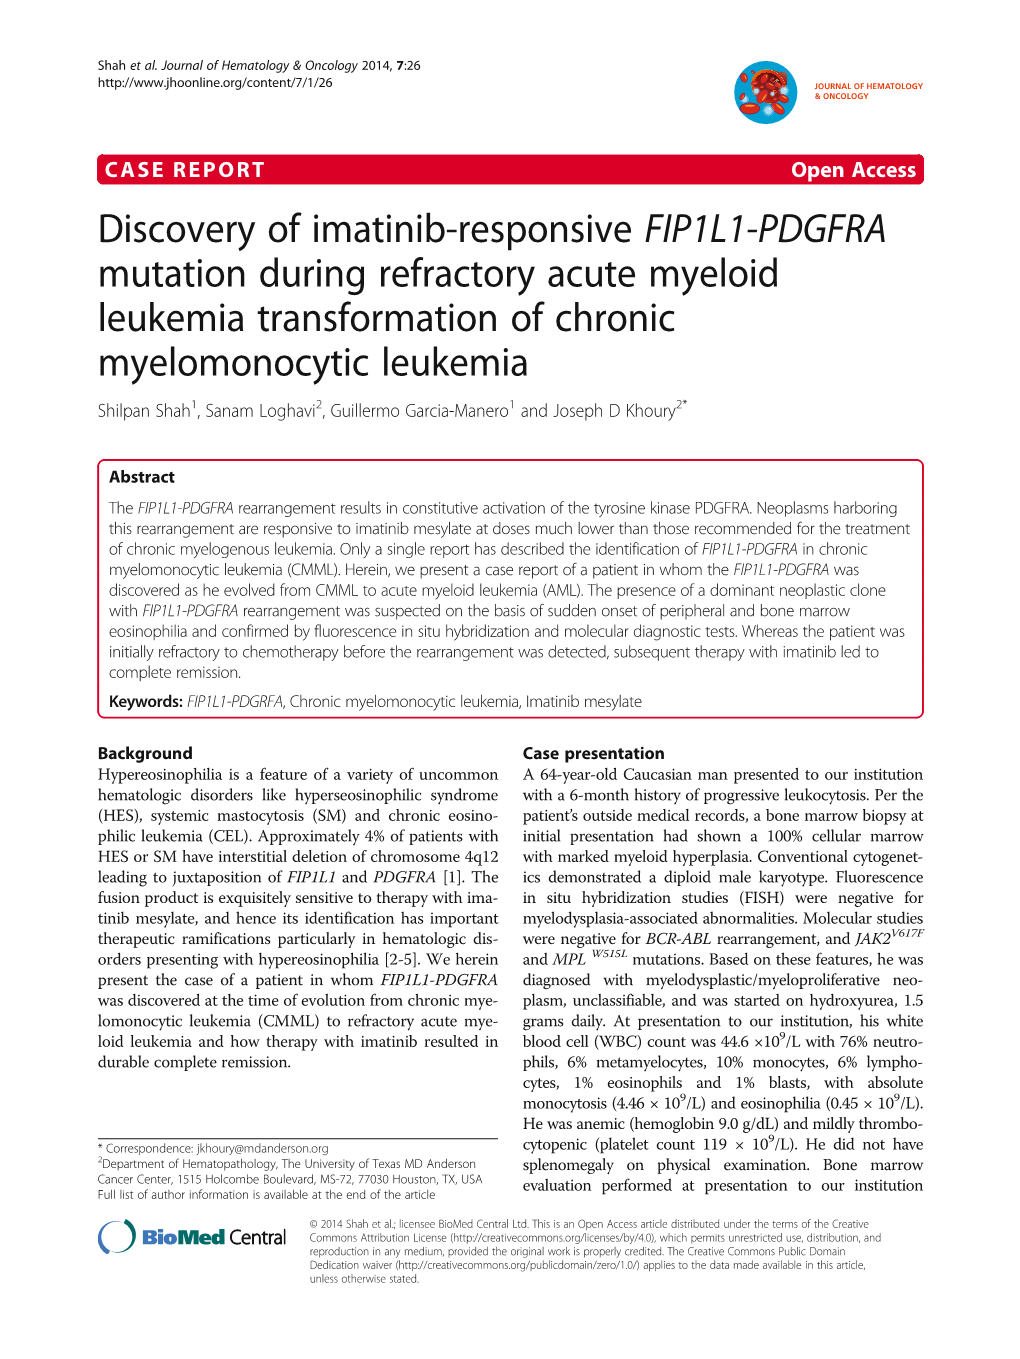 Discovery of Imatinib-Responsive FIP1L1-PDGFRA Mutation During Refractory Acute Myeloid Leukemia Transformation of Chronic Myelo